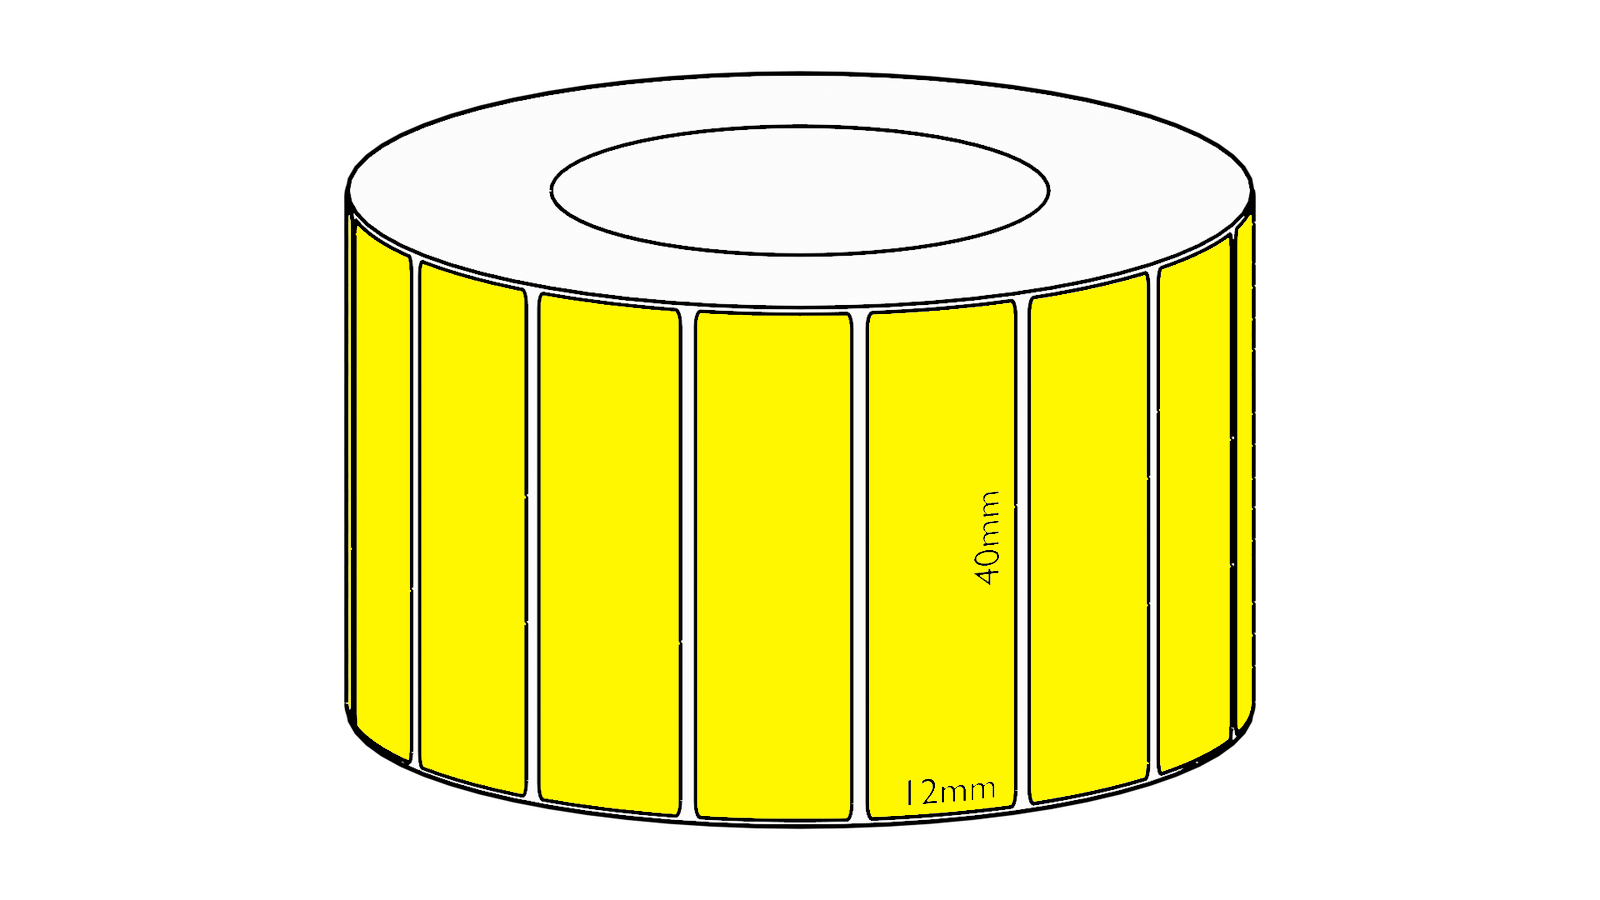 40x12mm Yellow Direct Thermal Permanent Label, 3350 per roll, 38mm core